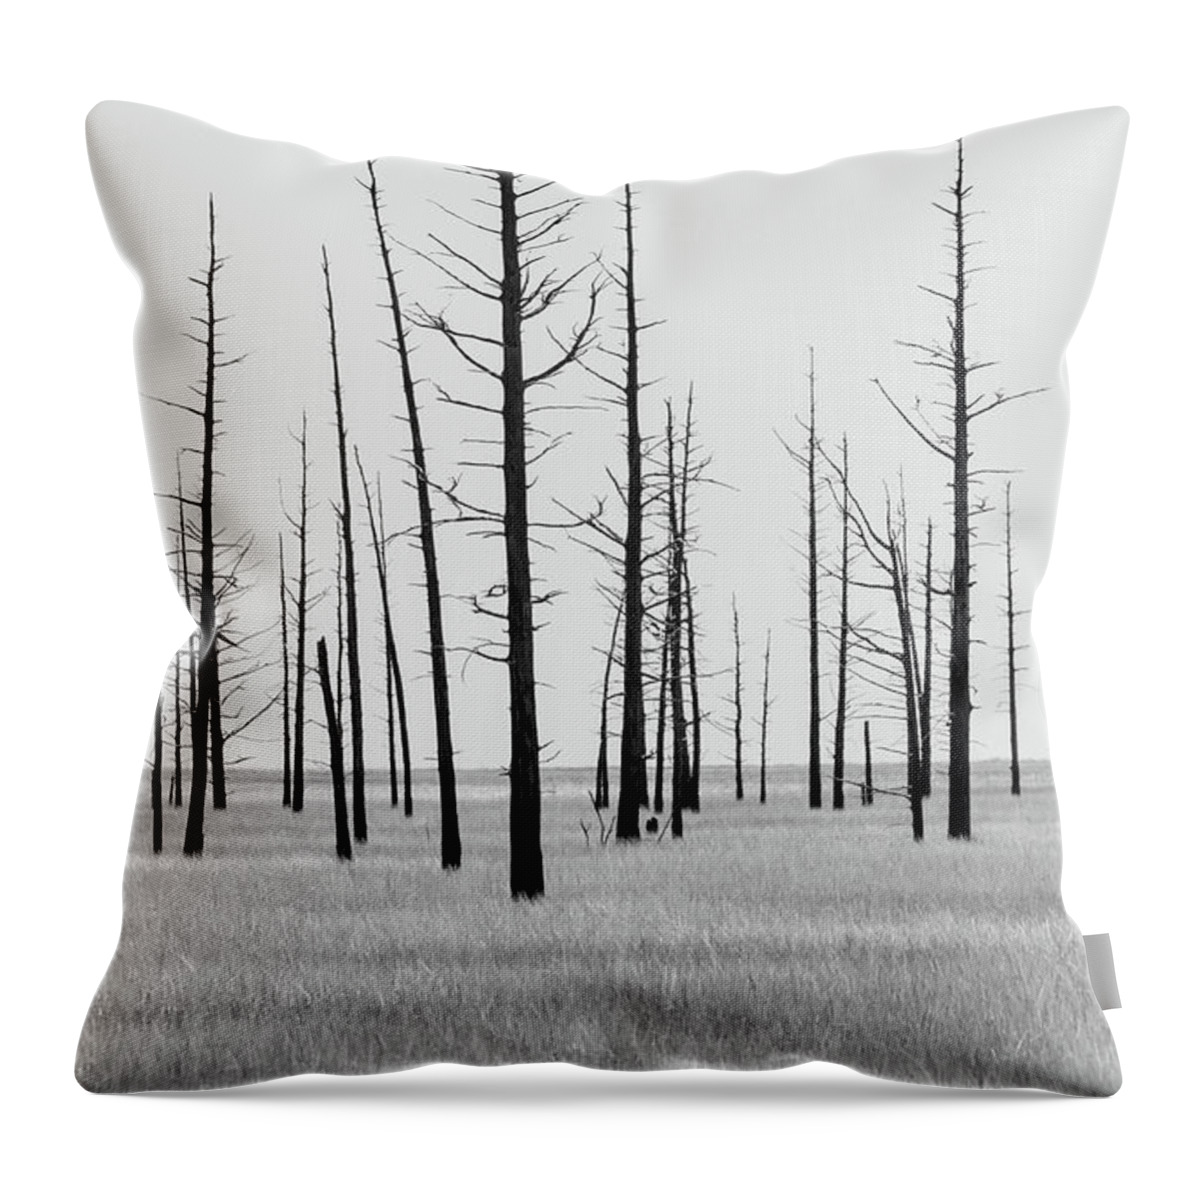 Landscape Throw Pillow featuring the photograph Trees Die off by Louis Dallara